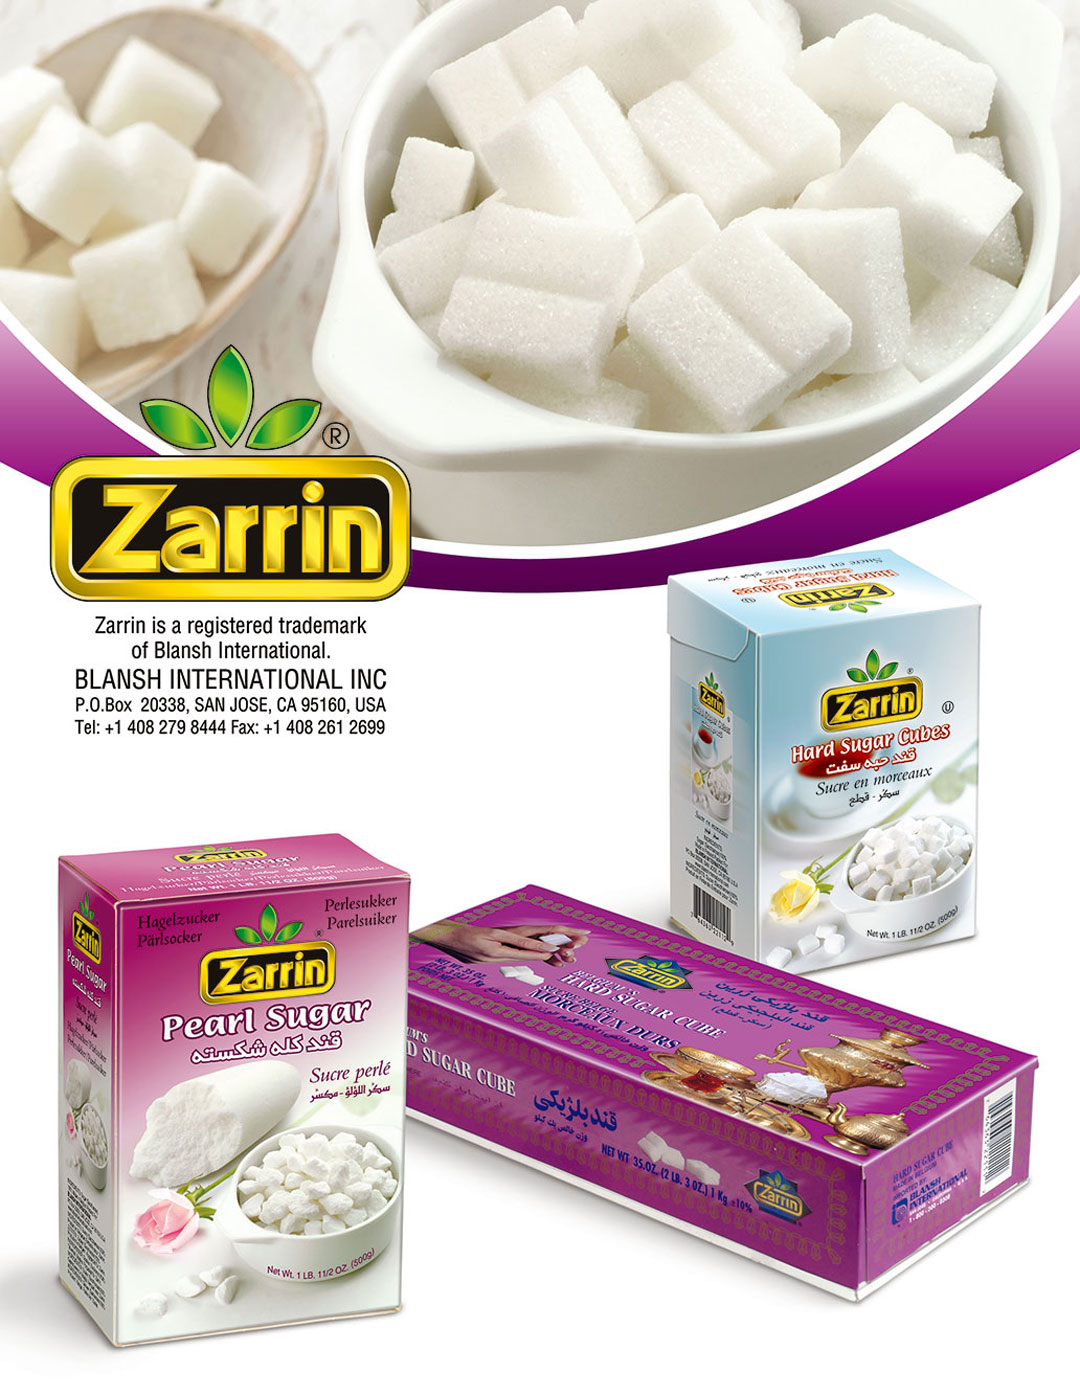 Sugar cubes such as hard and pear.